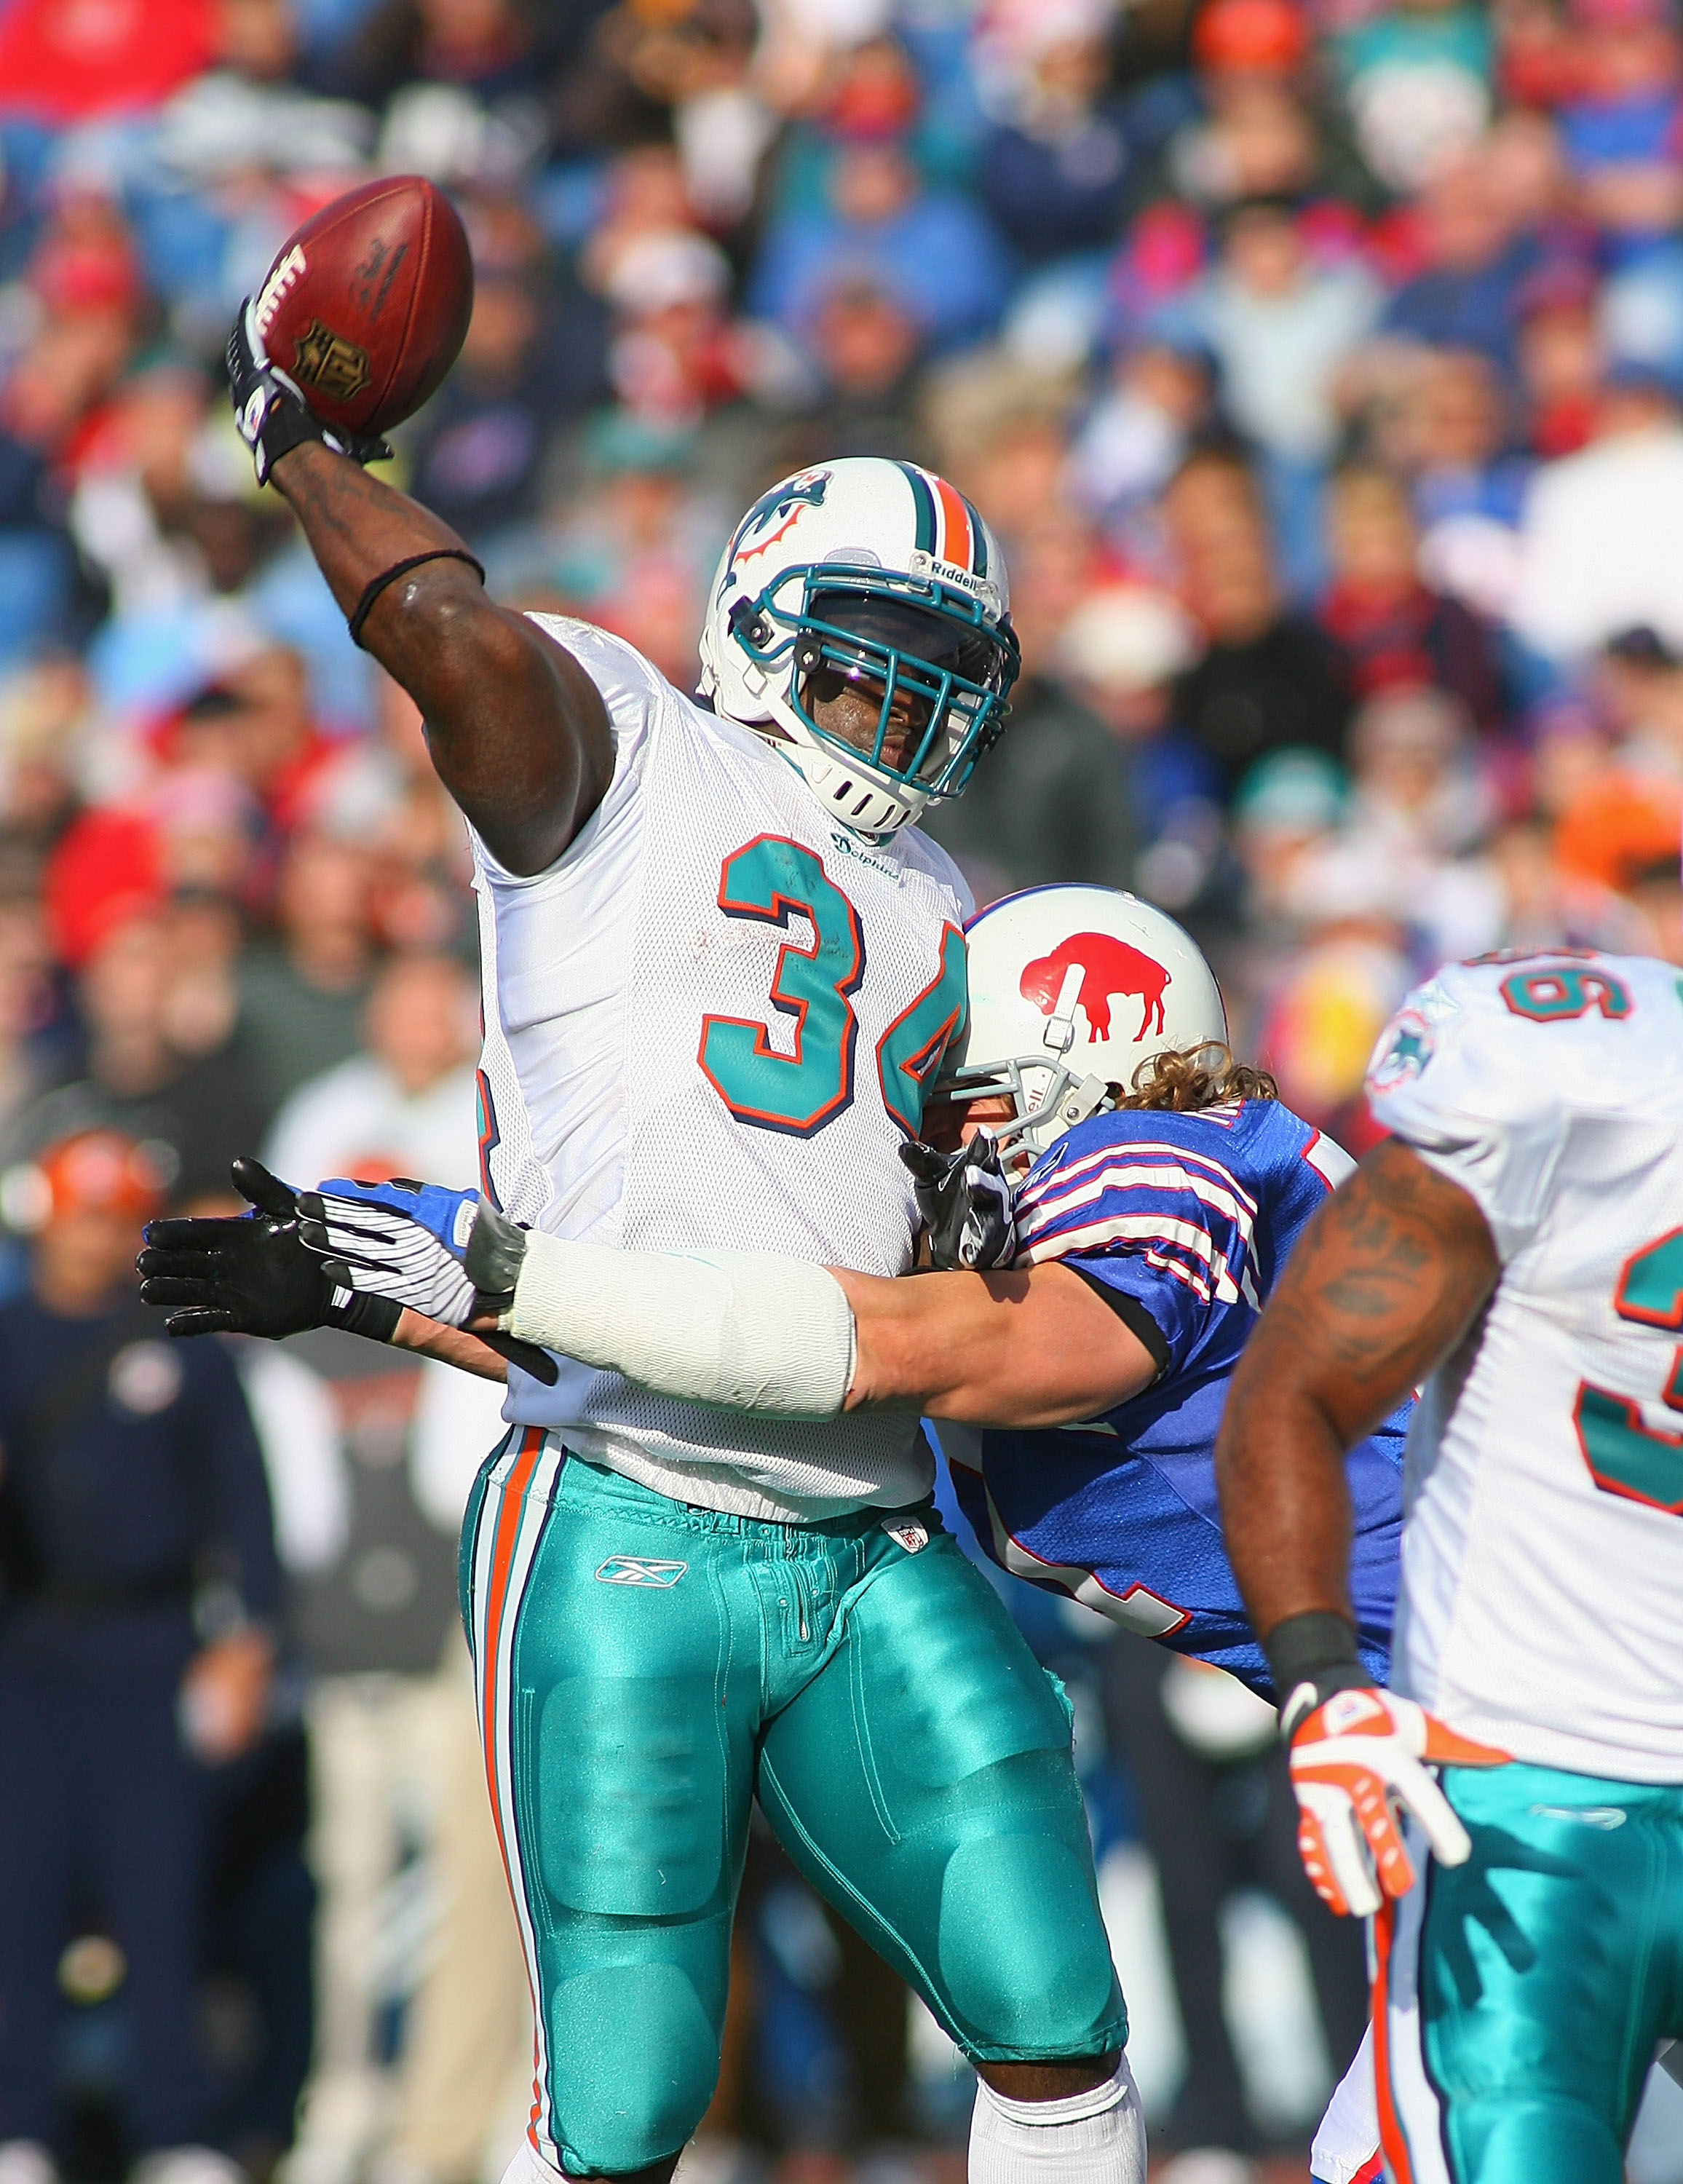 who are the dolphins plaaying next week